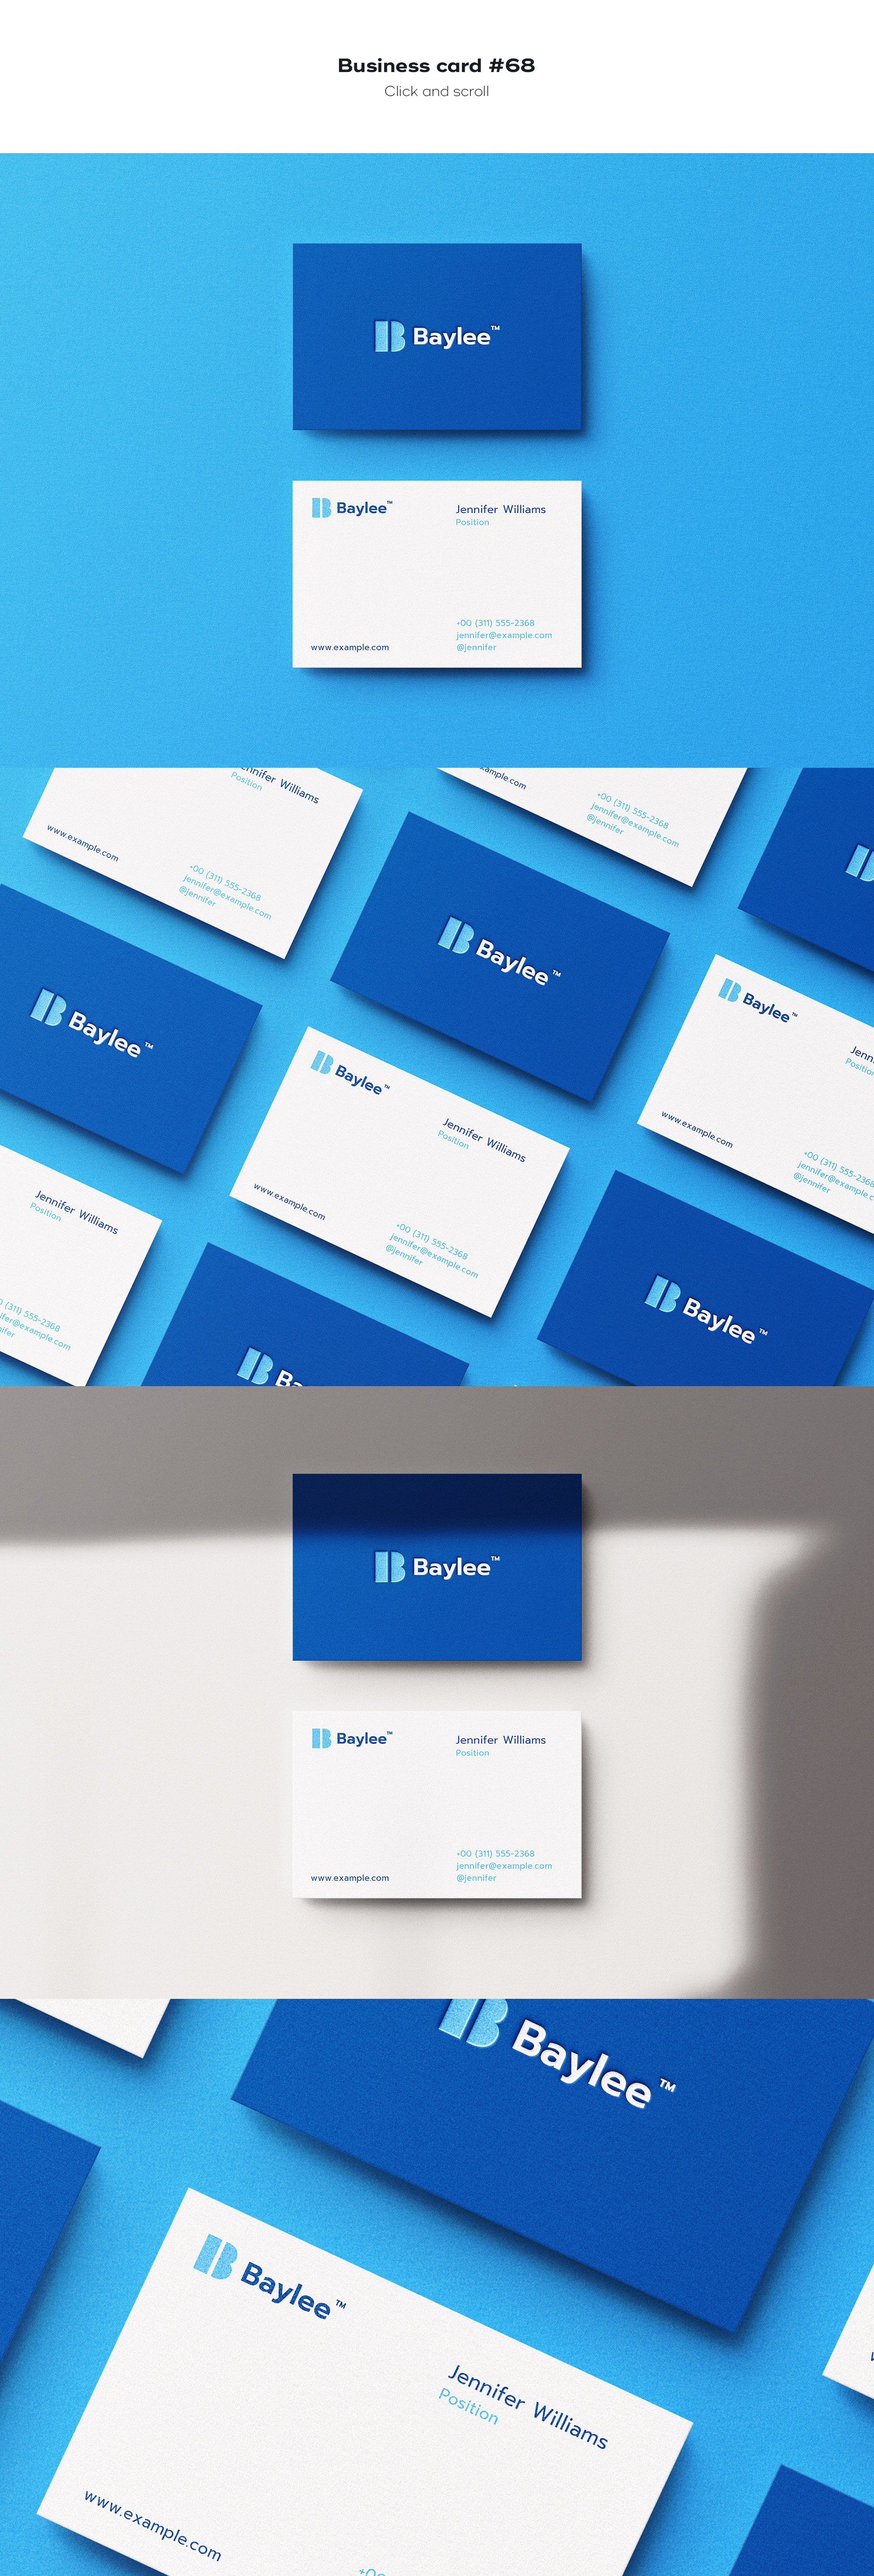 business card 68 762